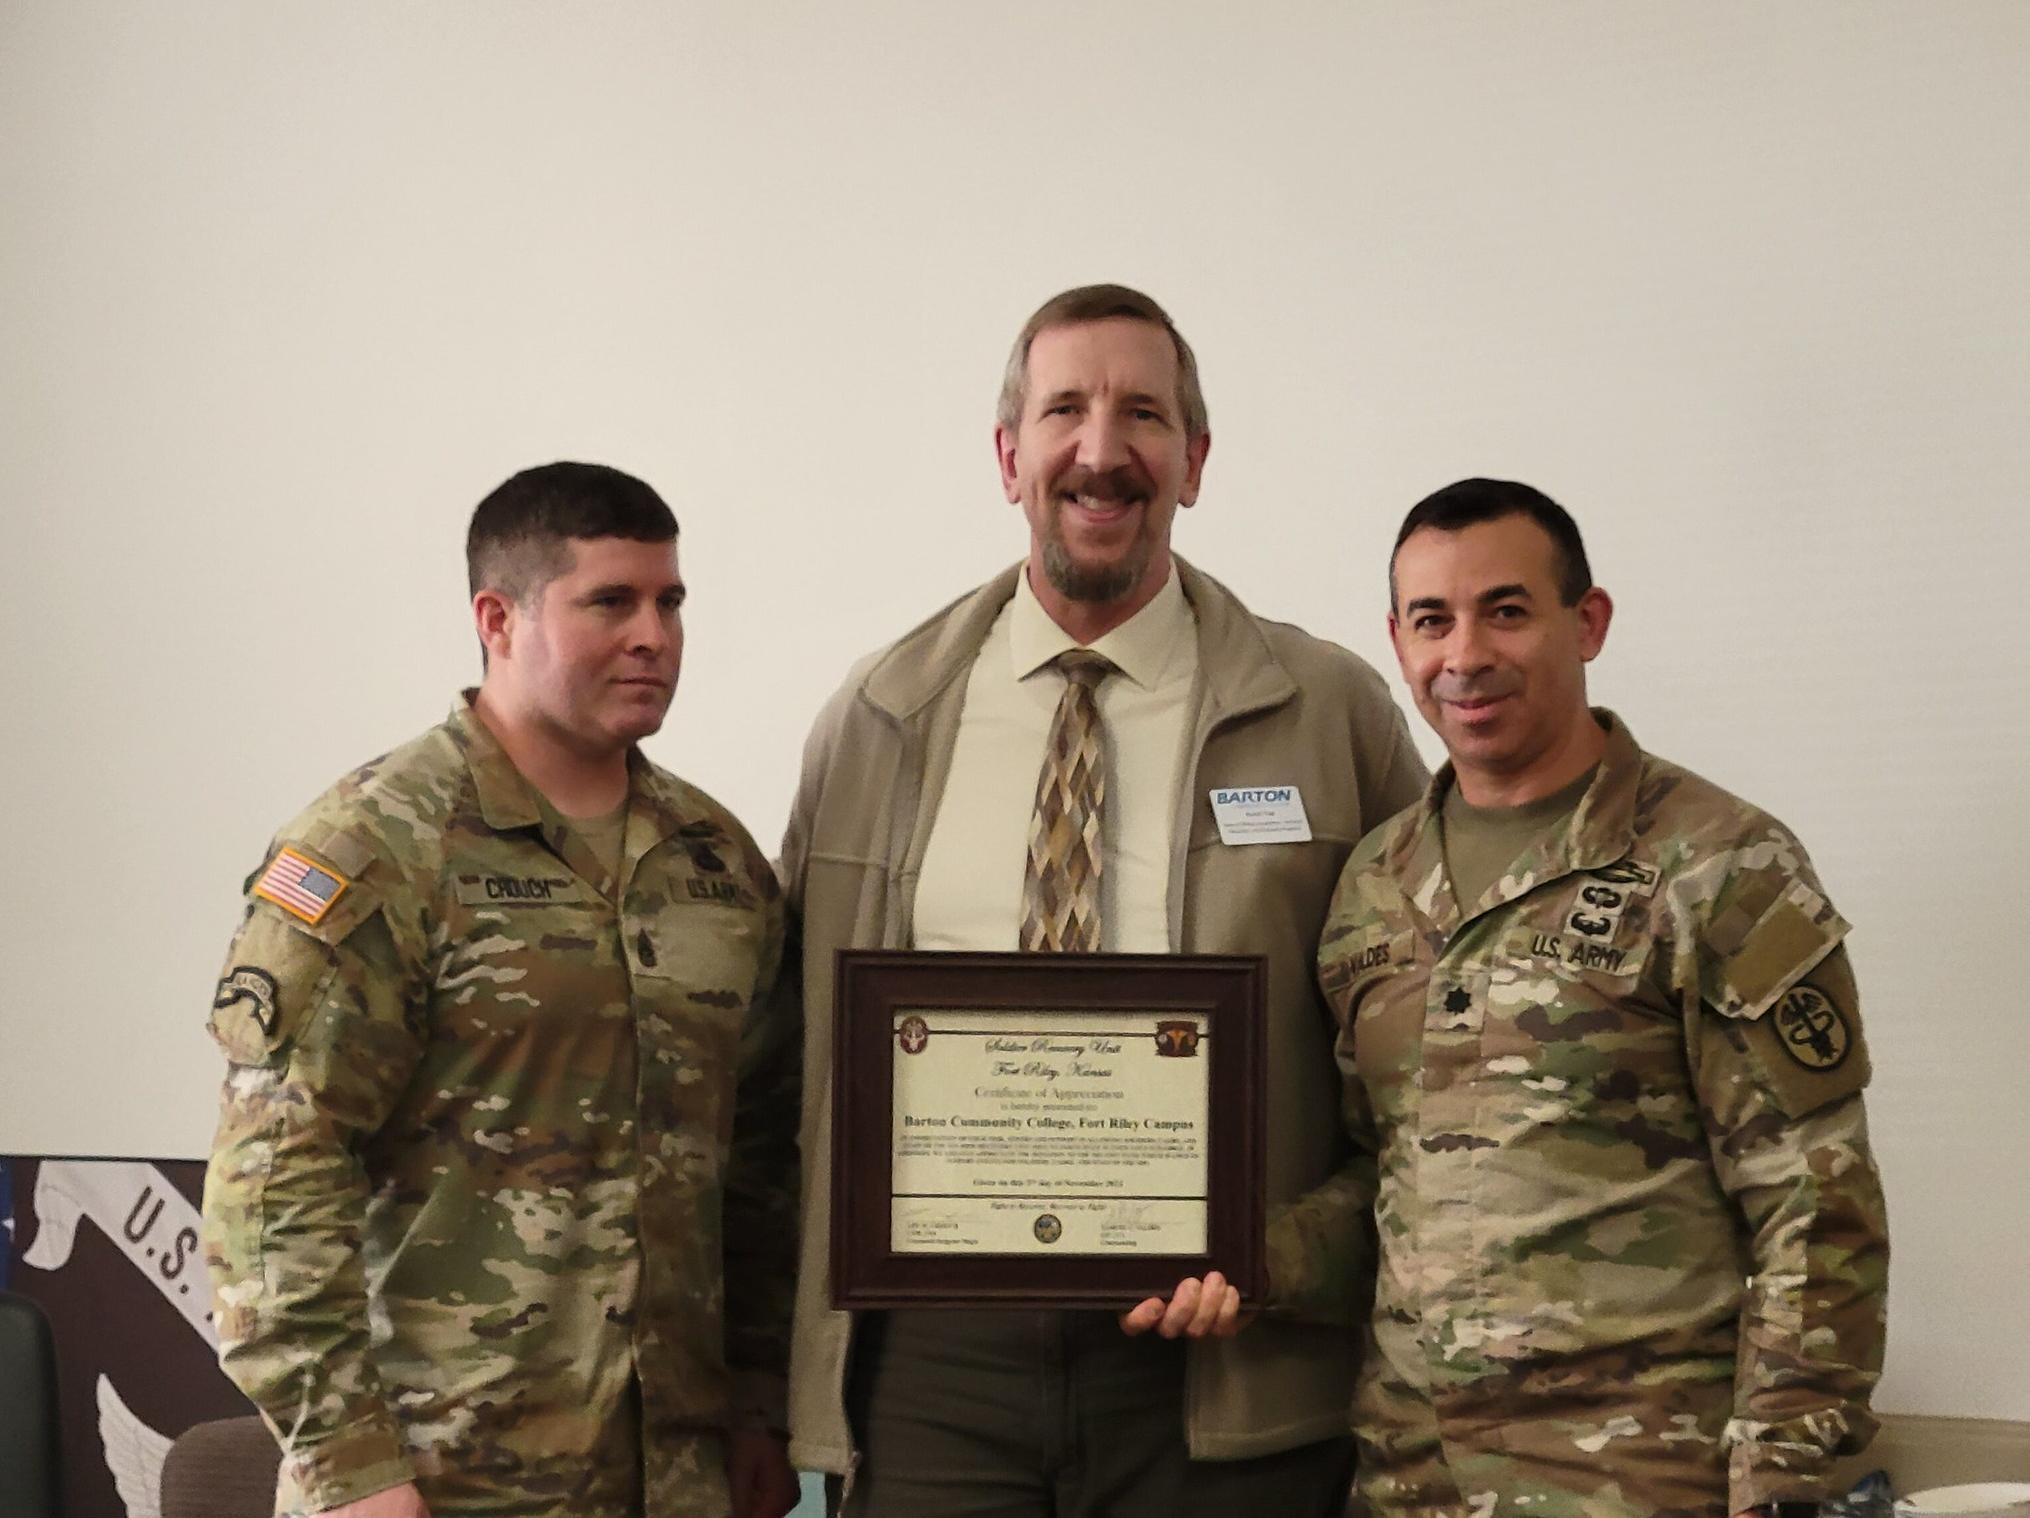 barton representative receiving a certificate of thanks from 2 soldiers